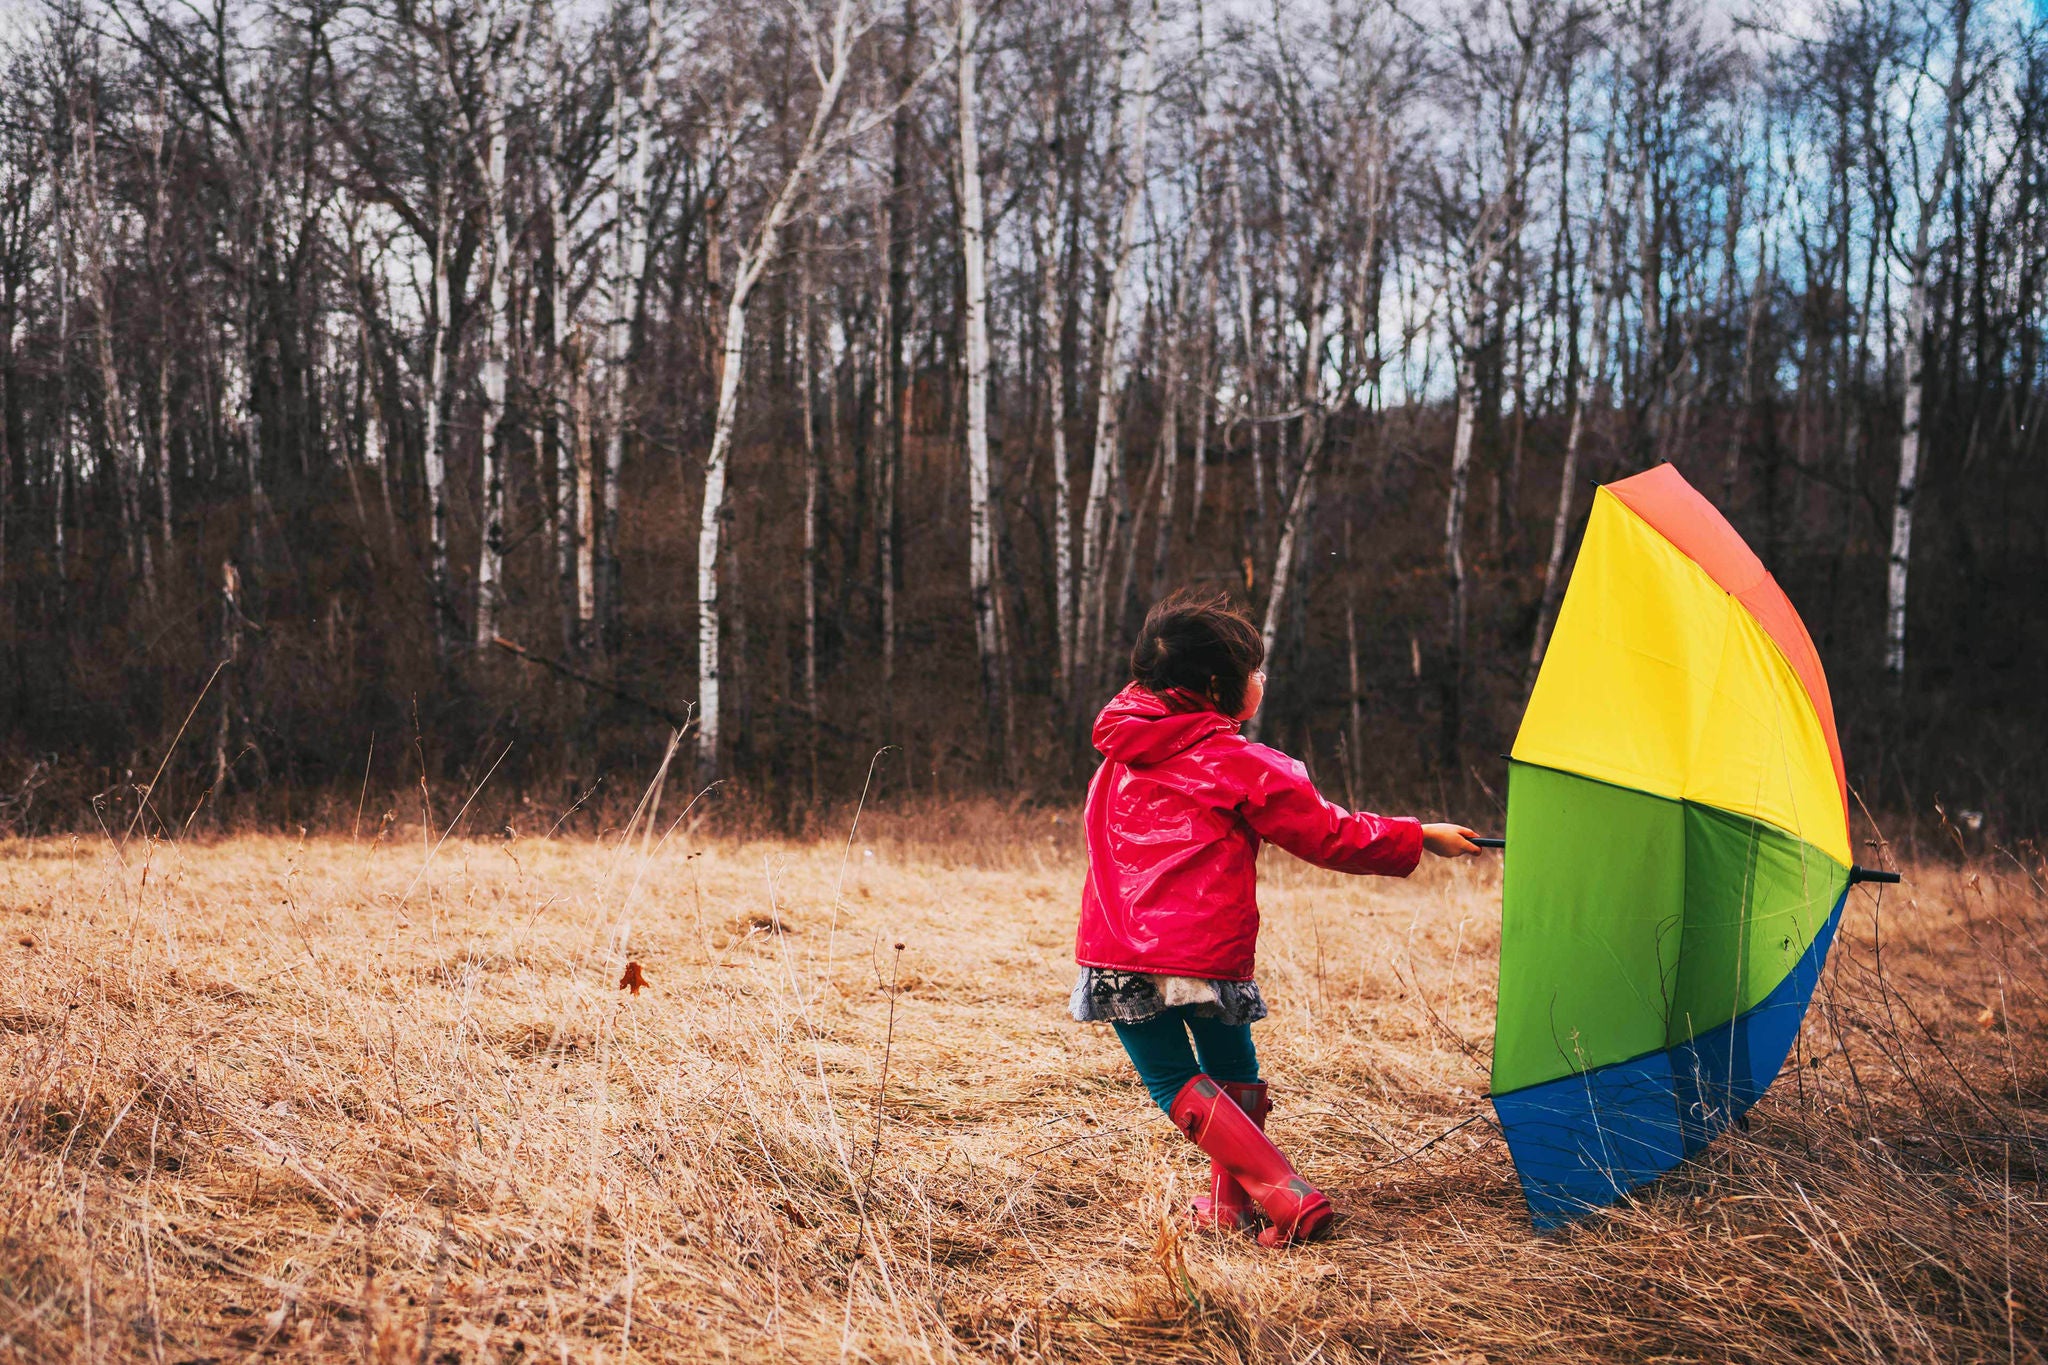 EY Girl playing in a field a multi-colored umbrella with red raincoat and boots 